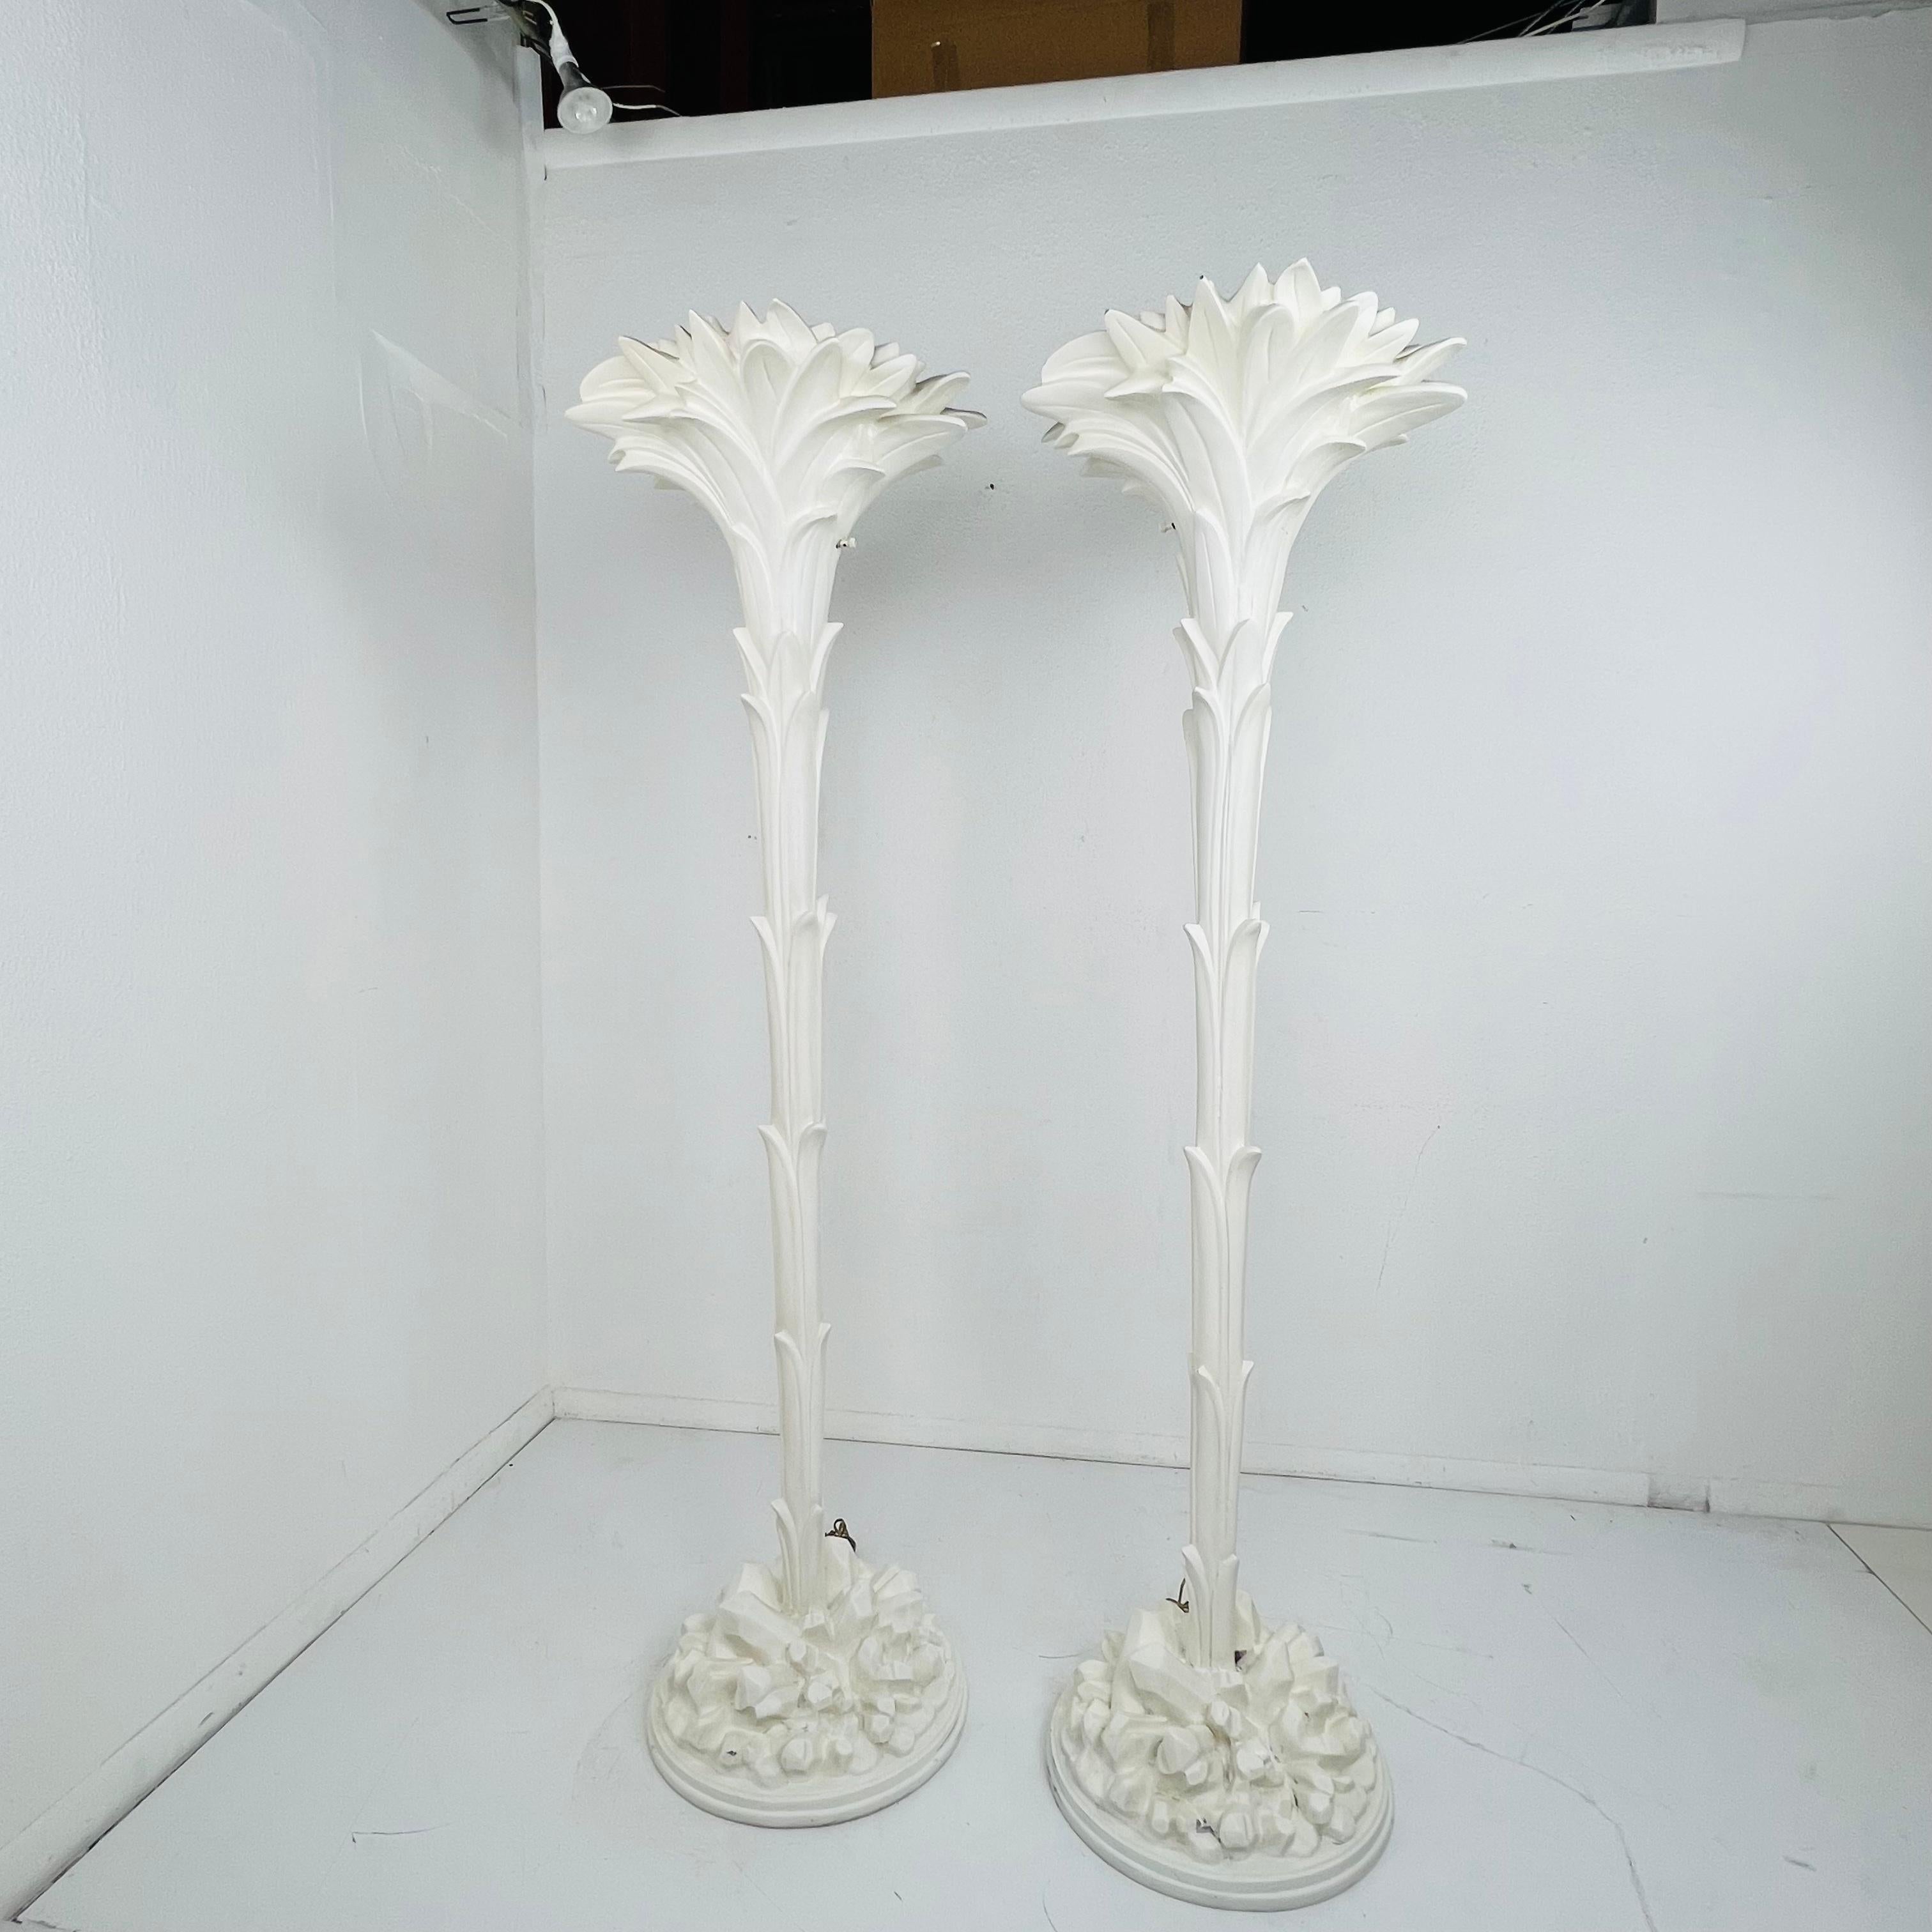 Hollywood Regency Pair of Palm Leaf Torchiere Lamps in the Manner of Serge Roche